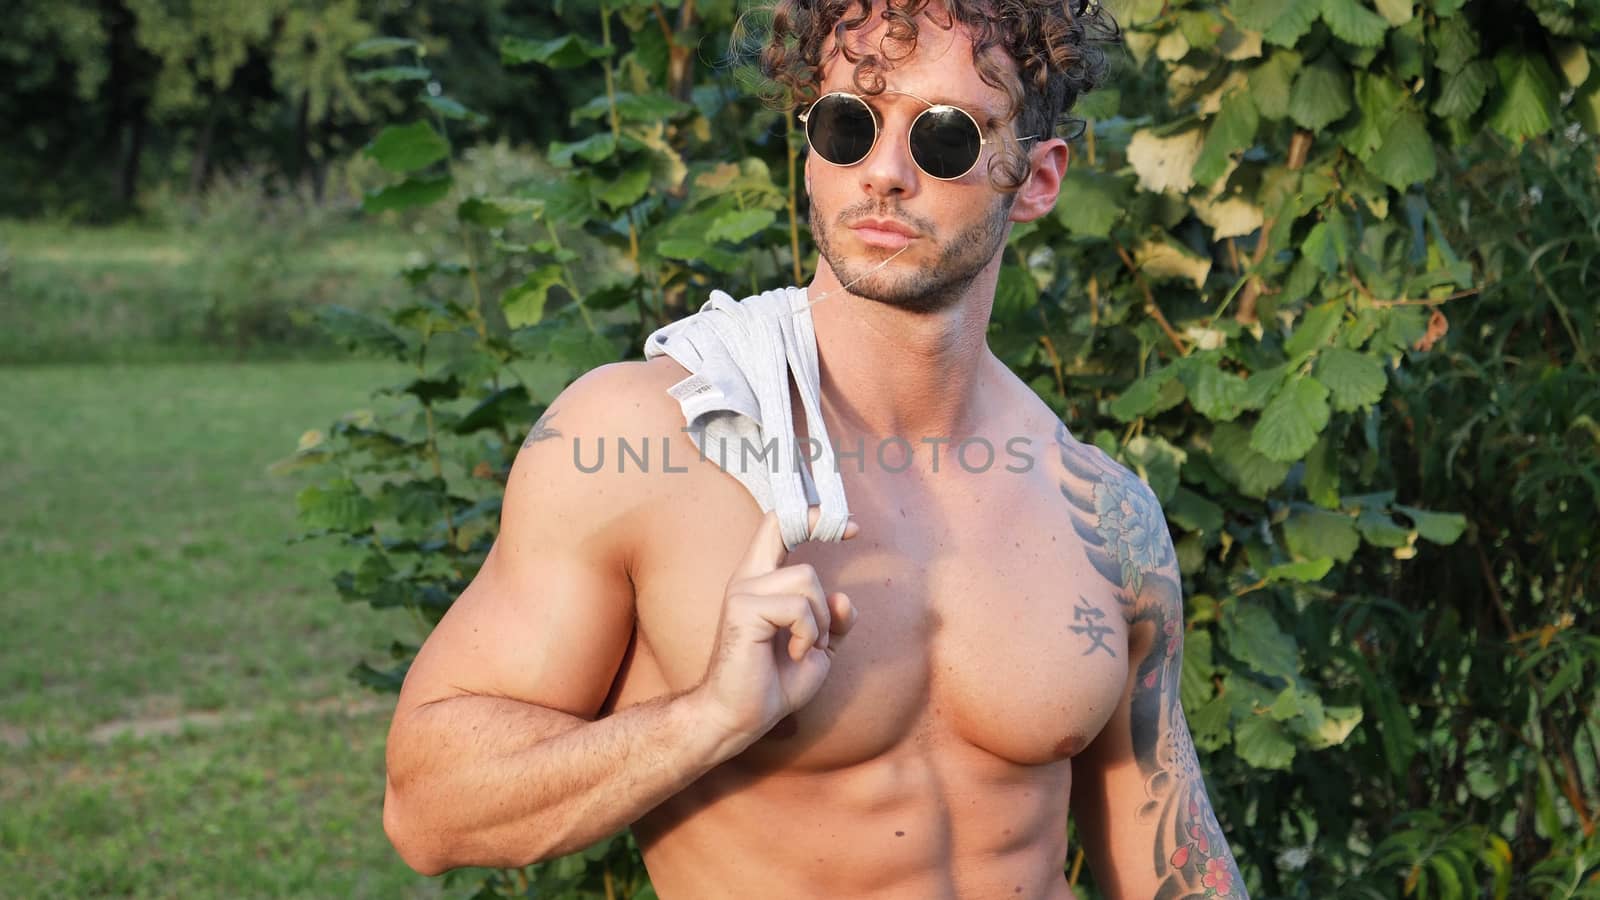 Handsome Muscular Shirtless Hunk Man Outdoor in Country Standing on Grass. Showing Healthy Muscle Body While Looking away